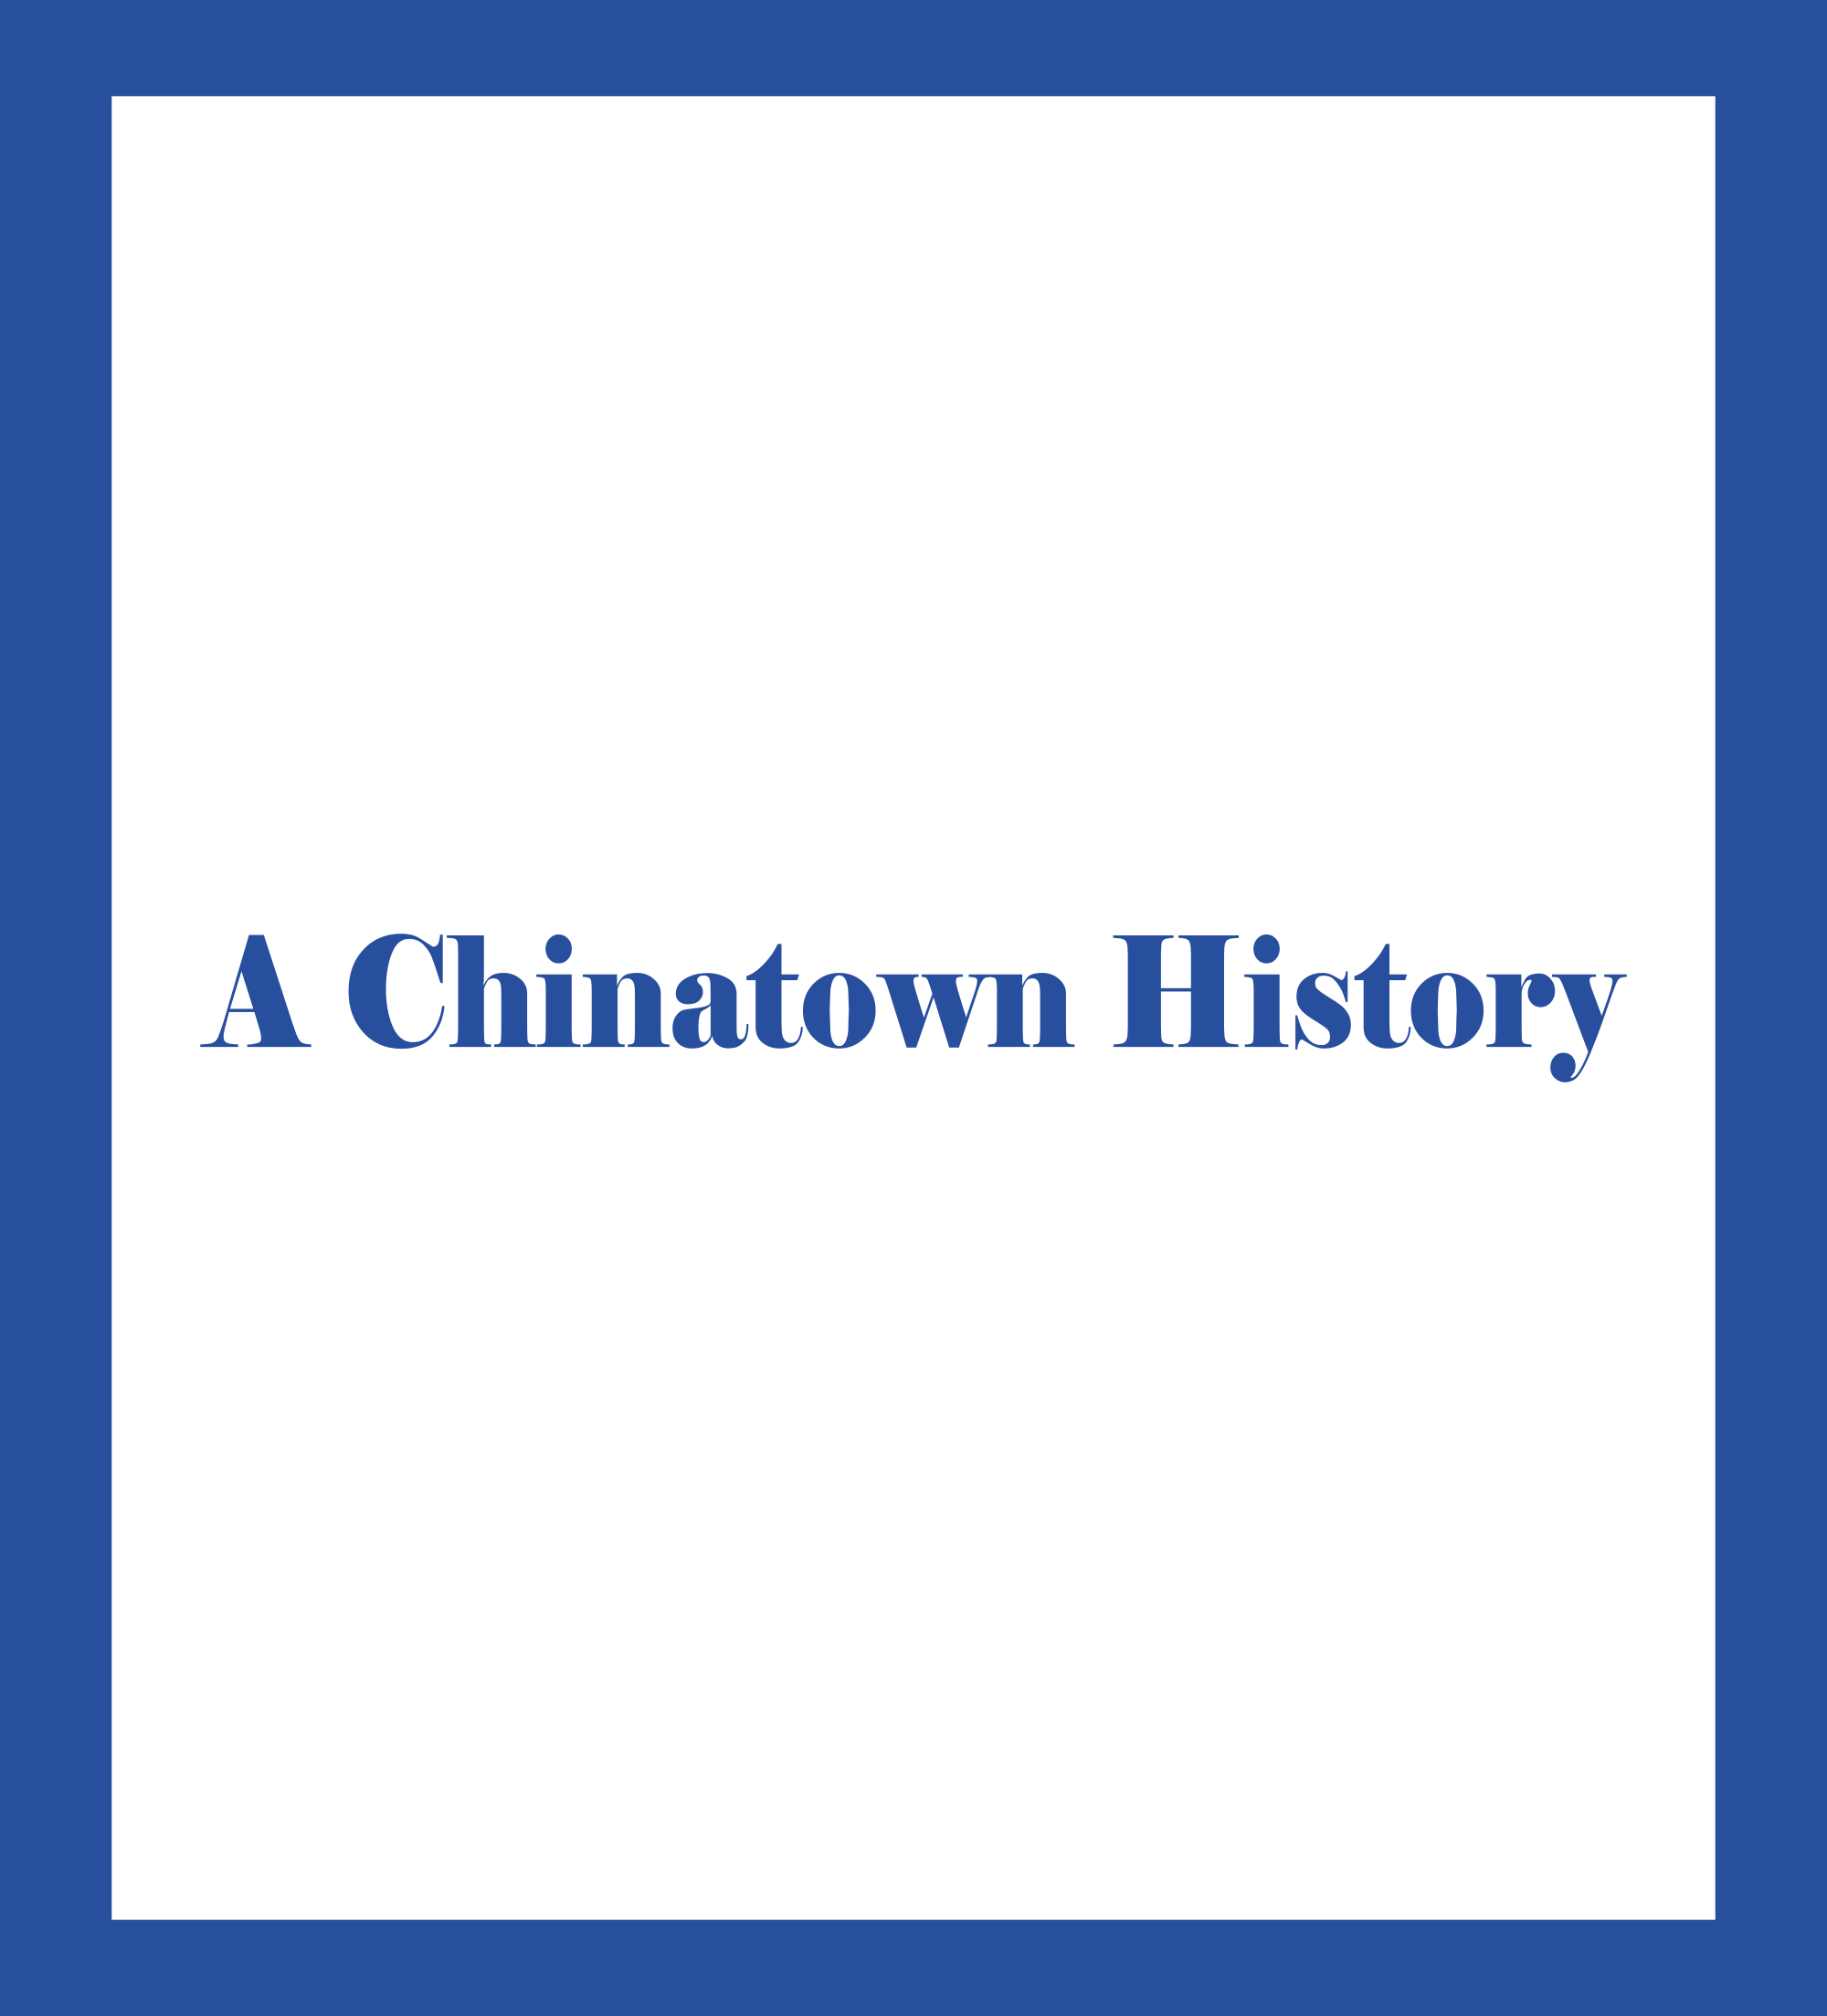 A Chinatown History